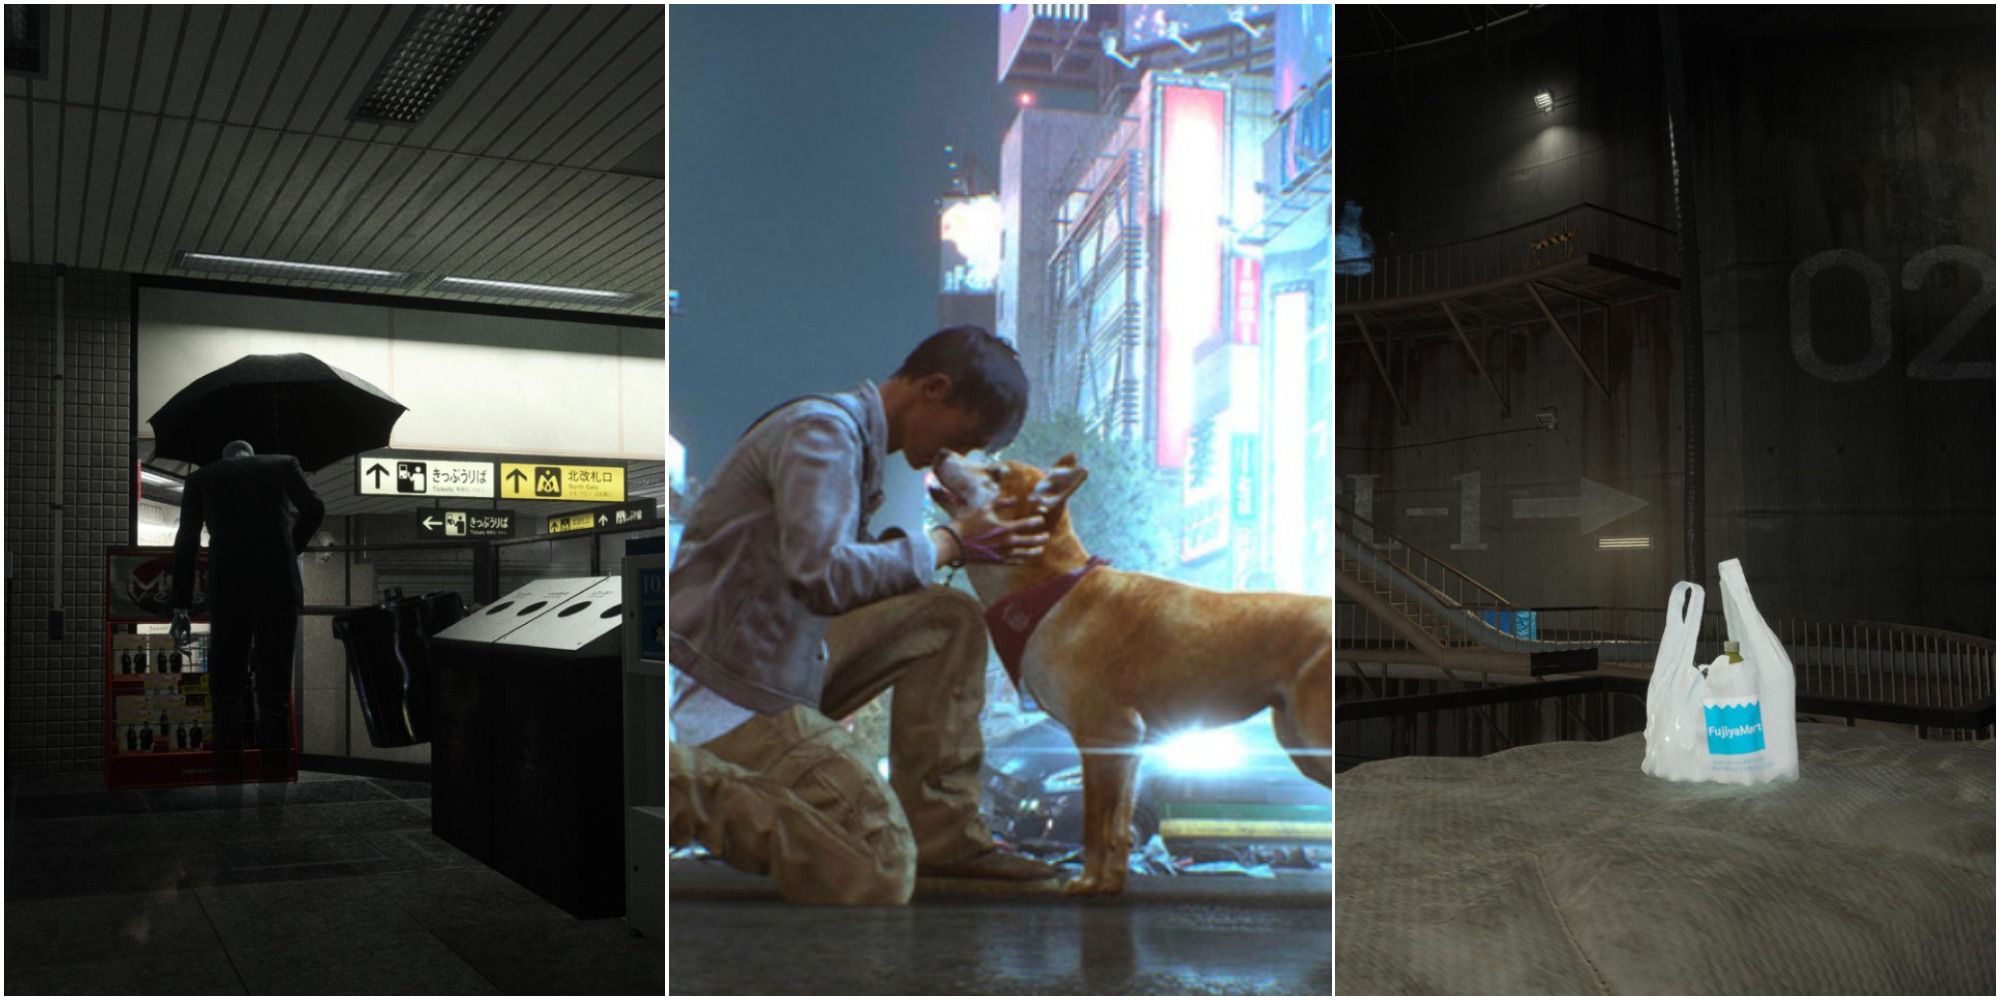 on the left is a visitor with its back turned, in the middle is Akito petting a dog and on the right is a solitary shopping bag